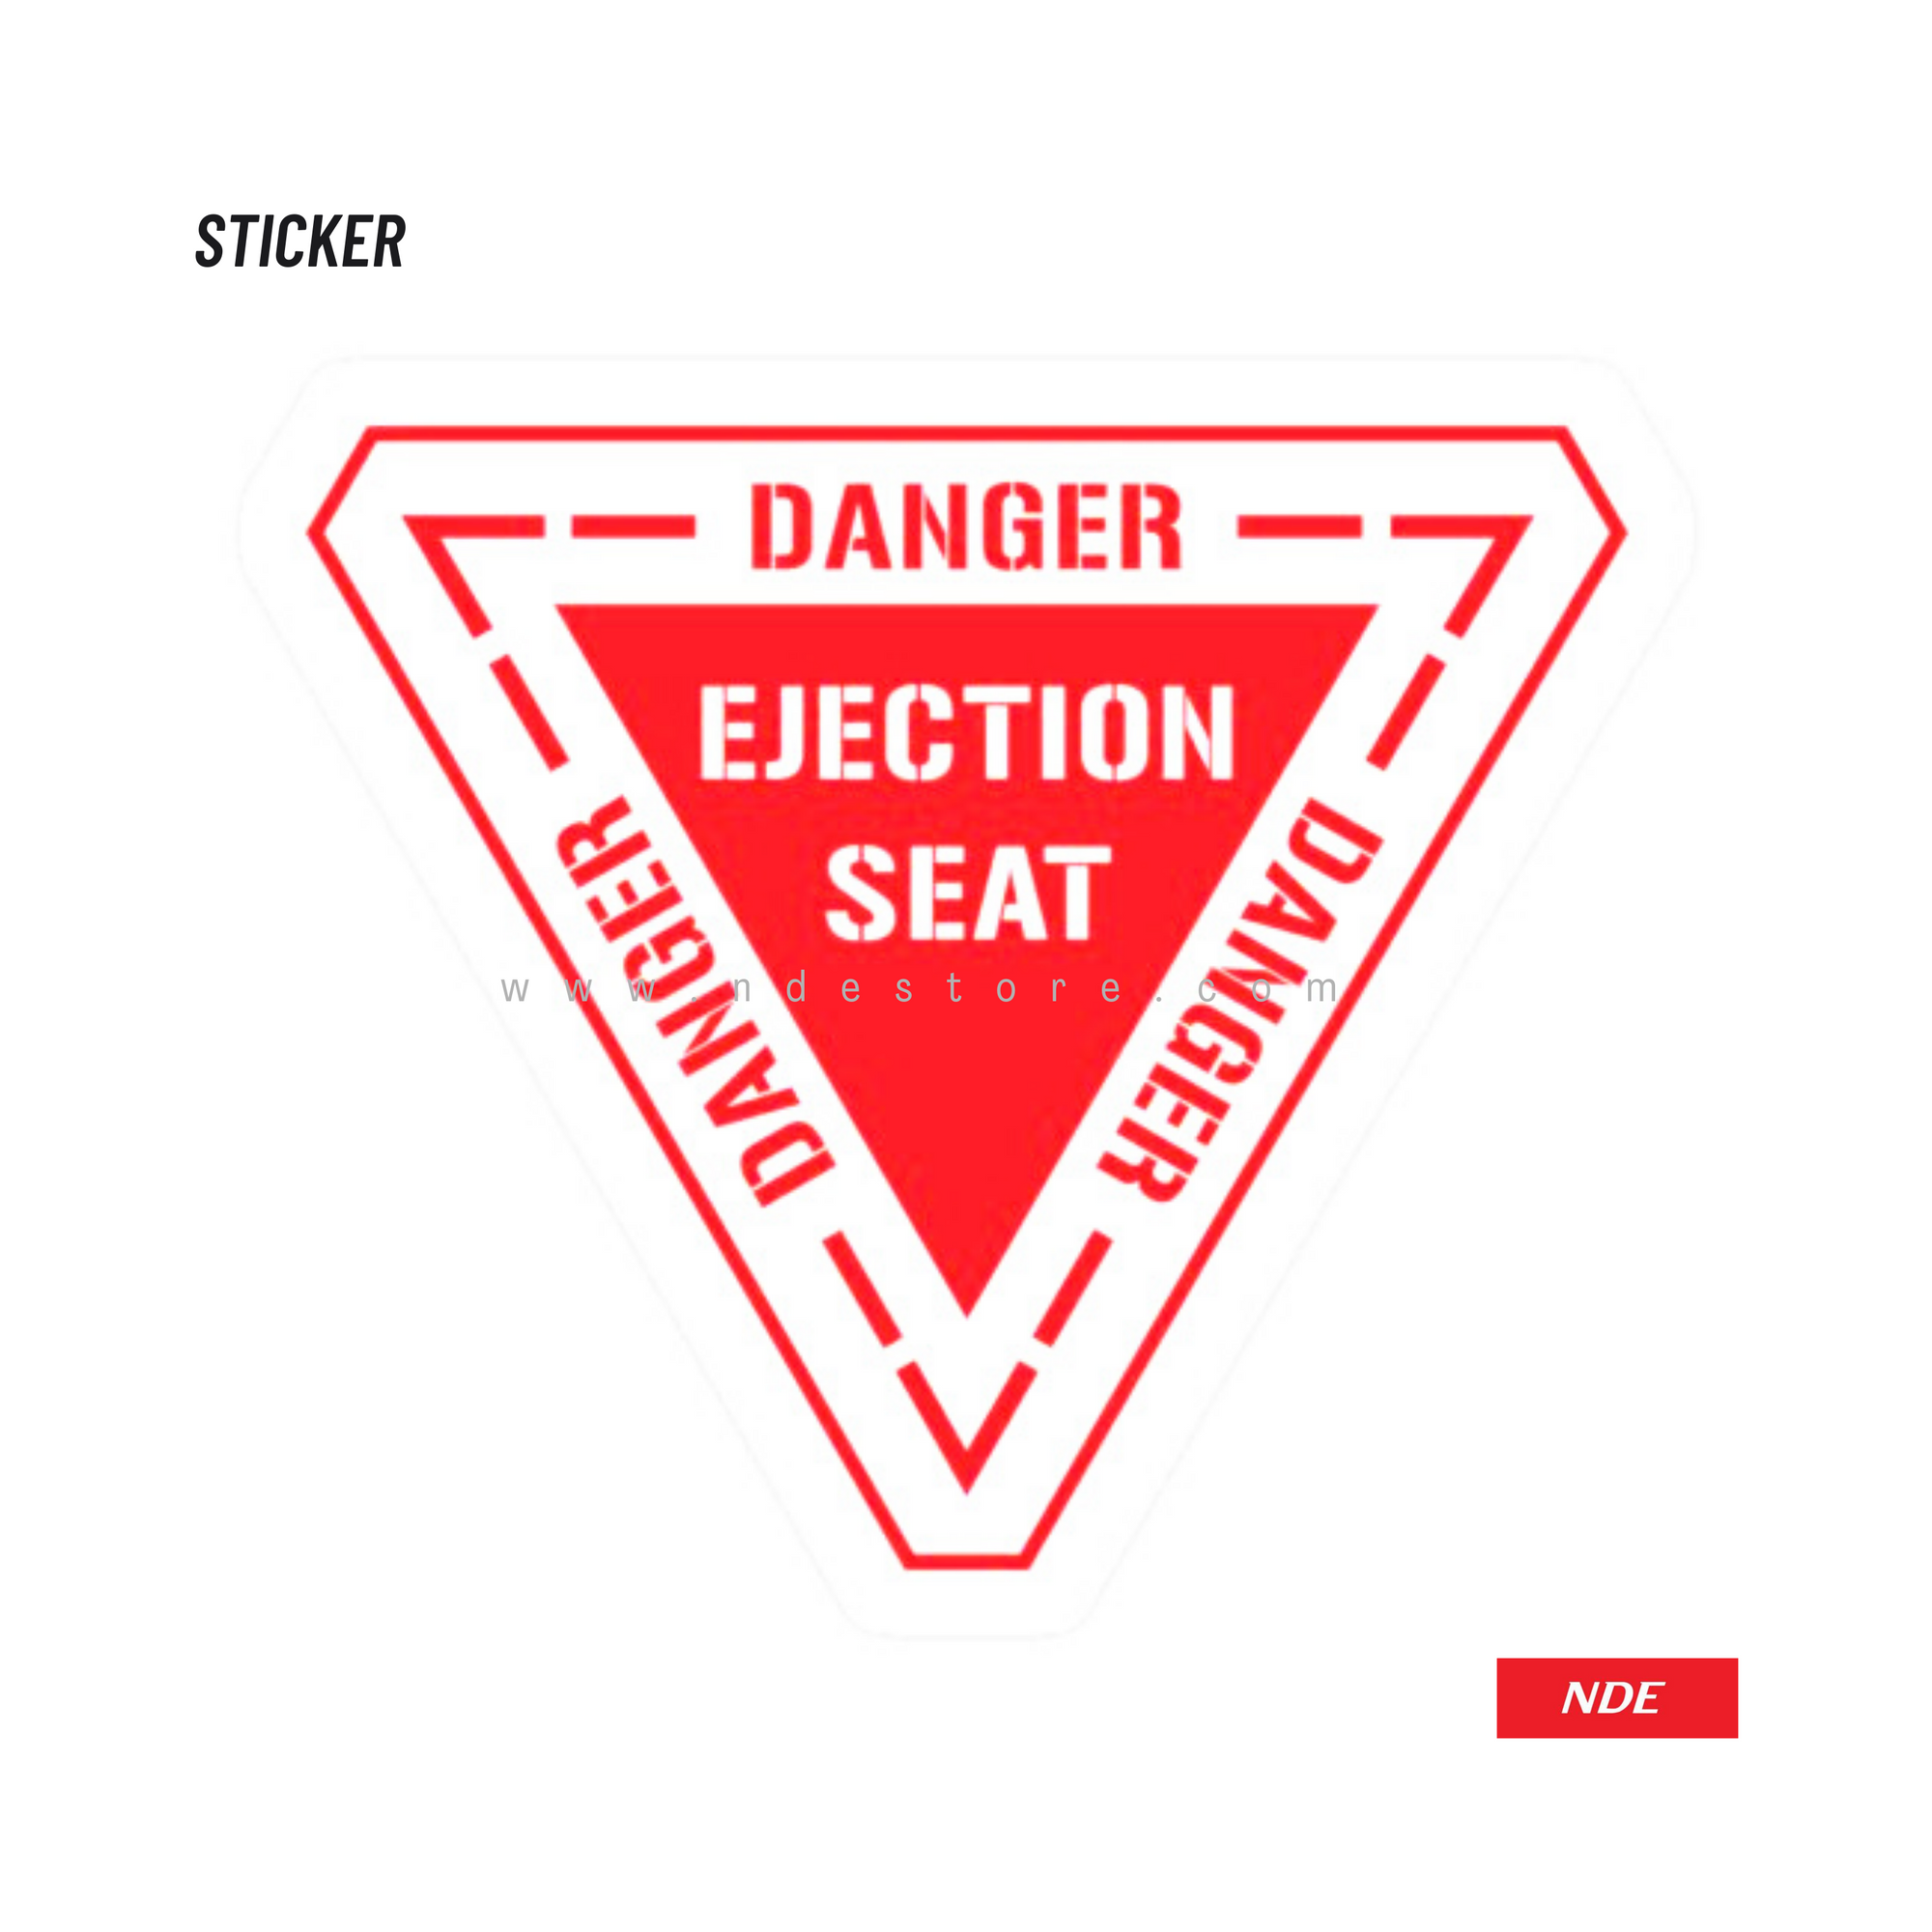 STICKER, EJECTION SEAT